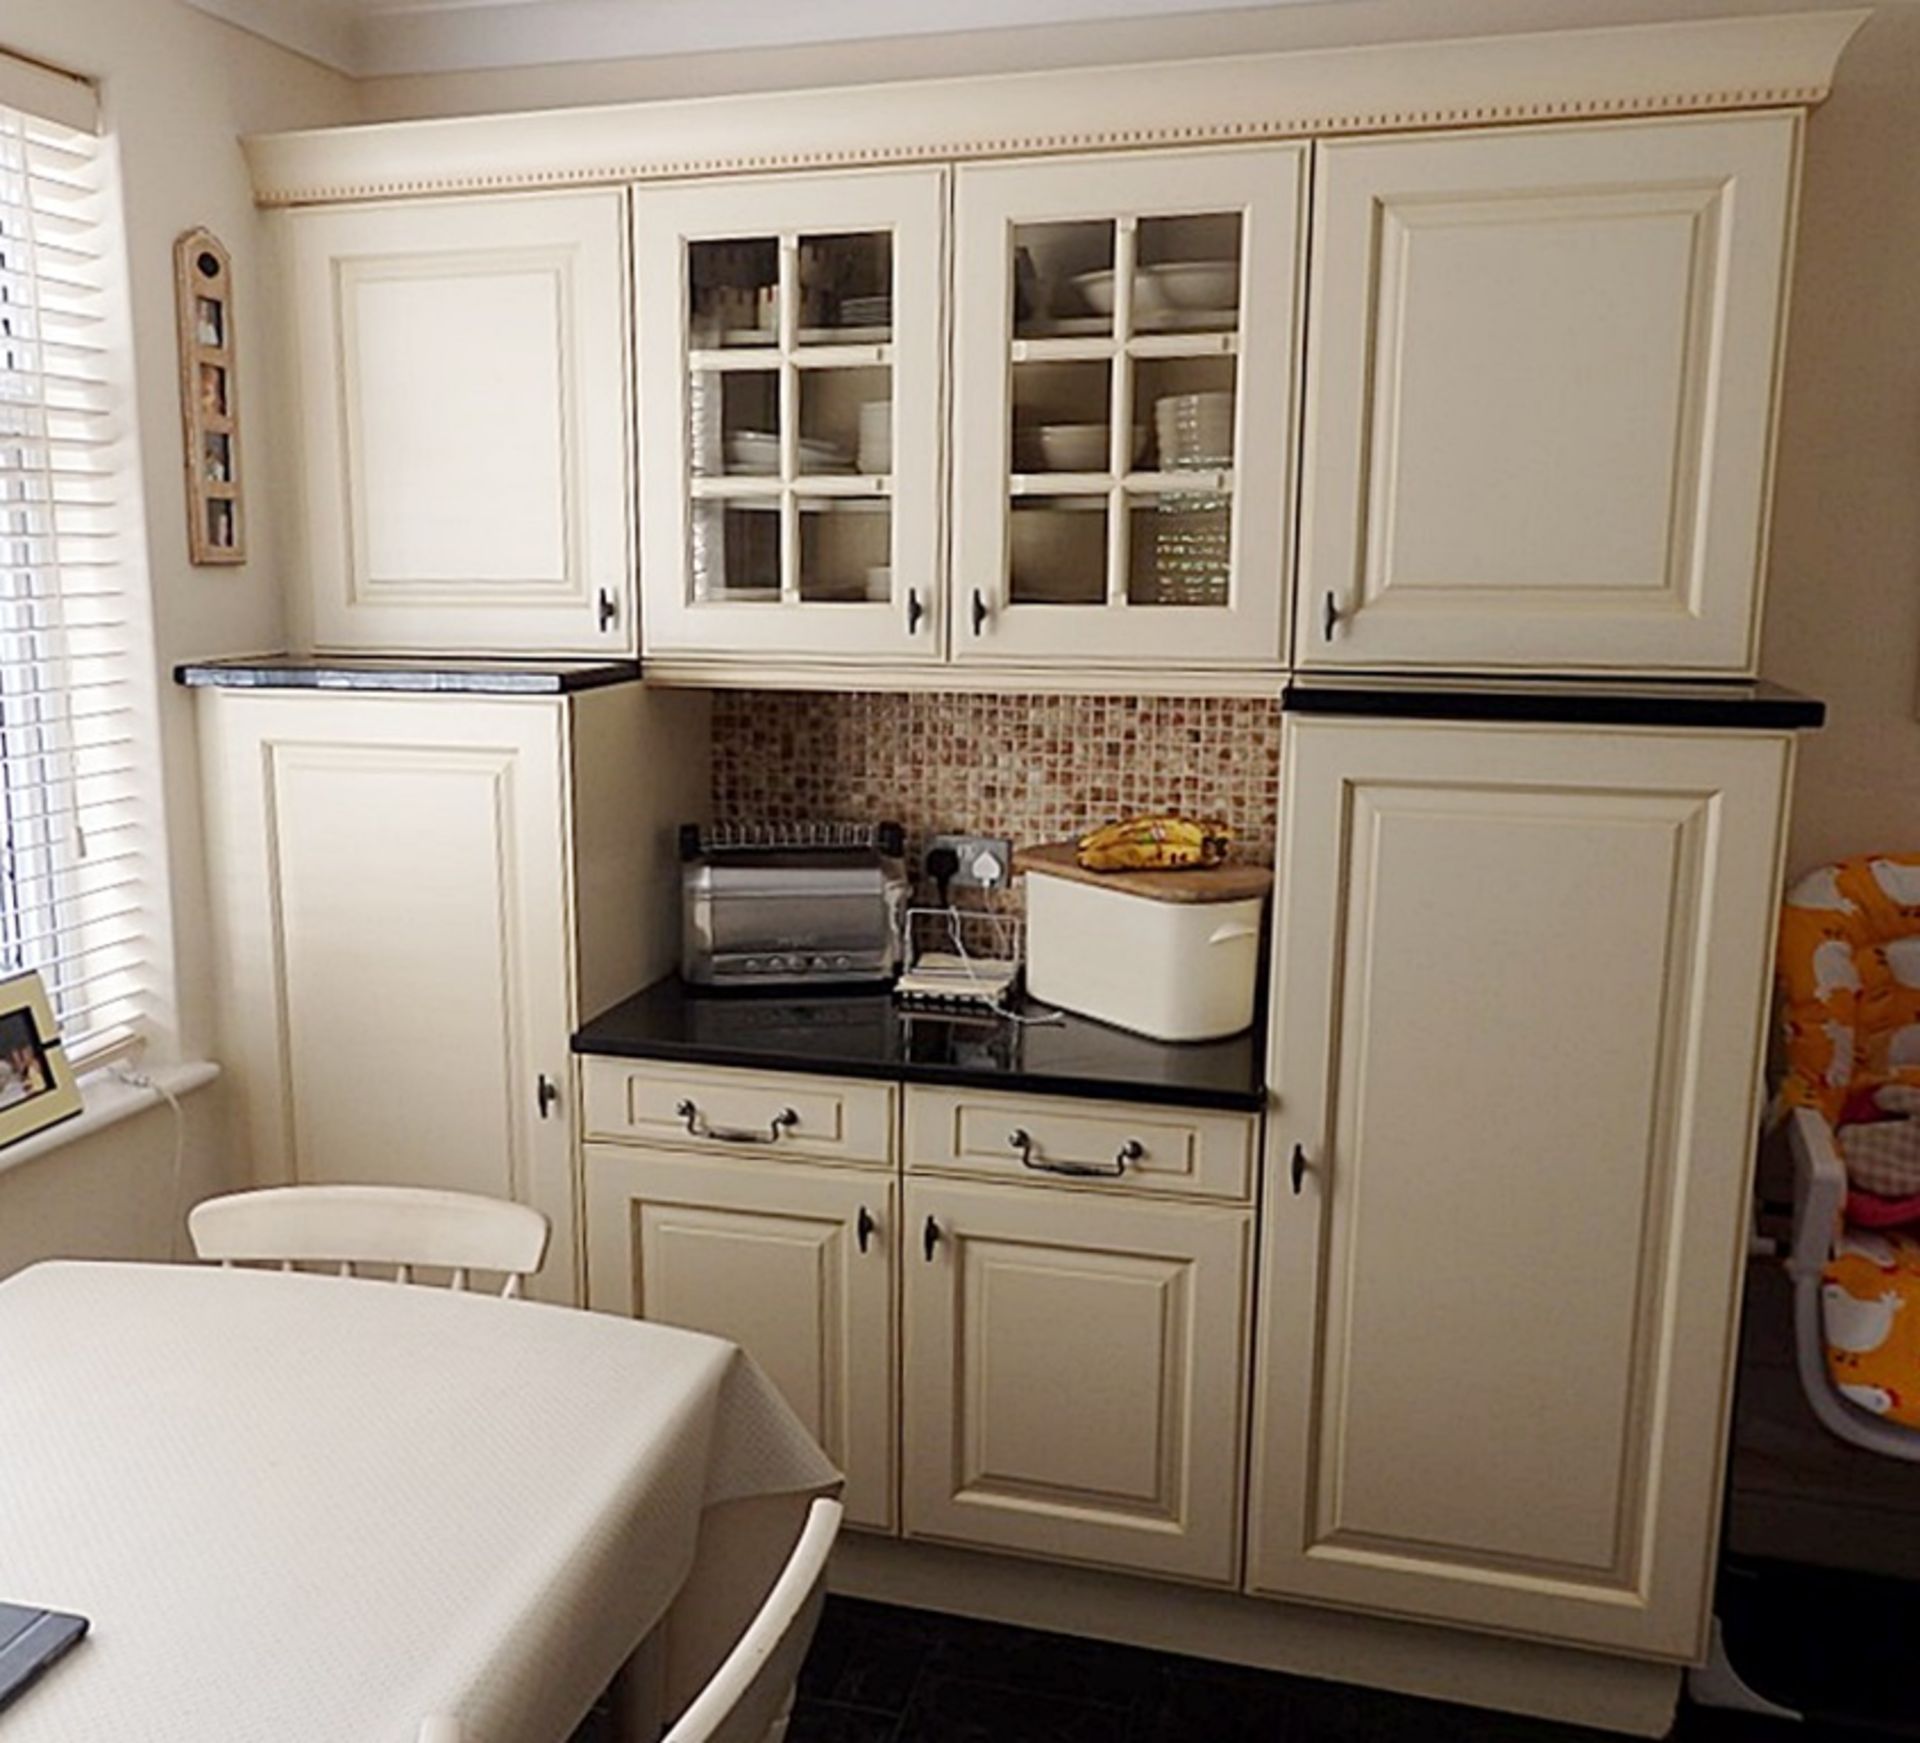 1 x Traditional Style Cream Kitchen With Luxurious Black Granite Worktops - Includes Freezer & - Image 19 of 31